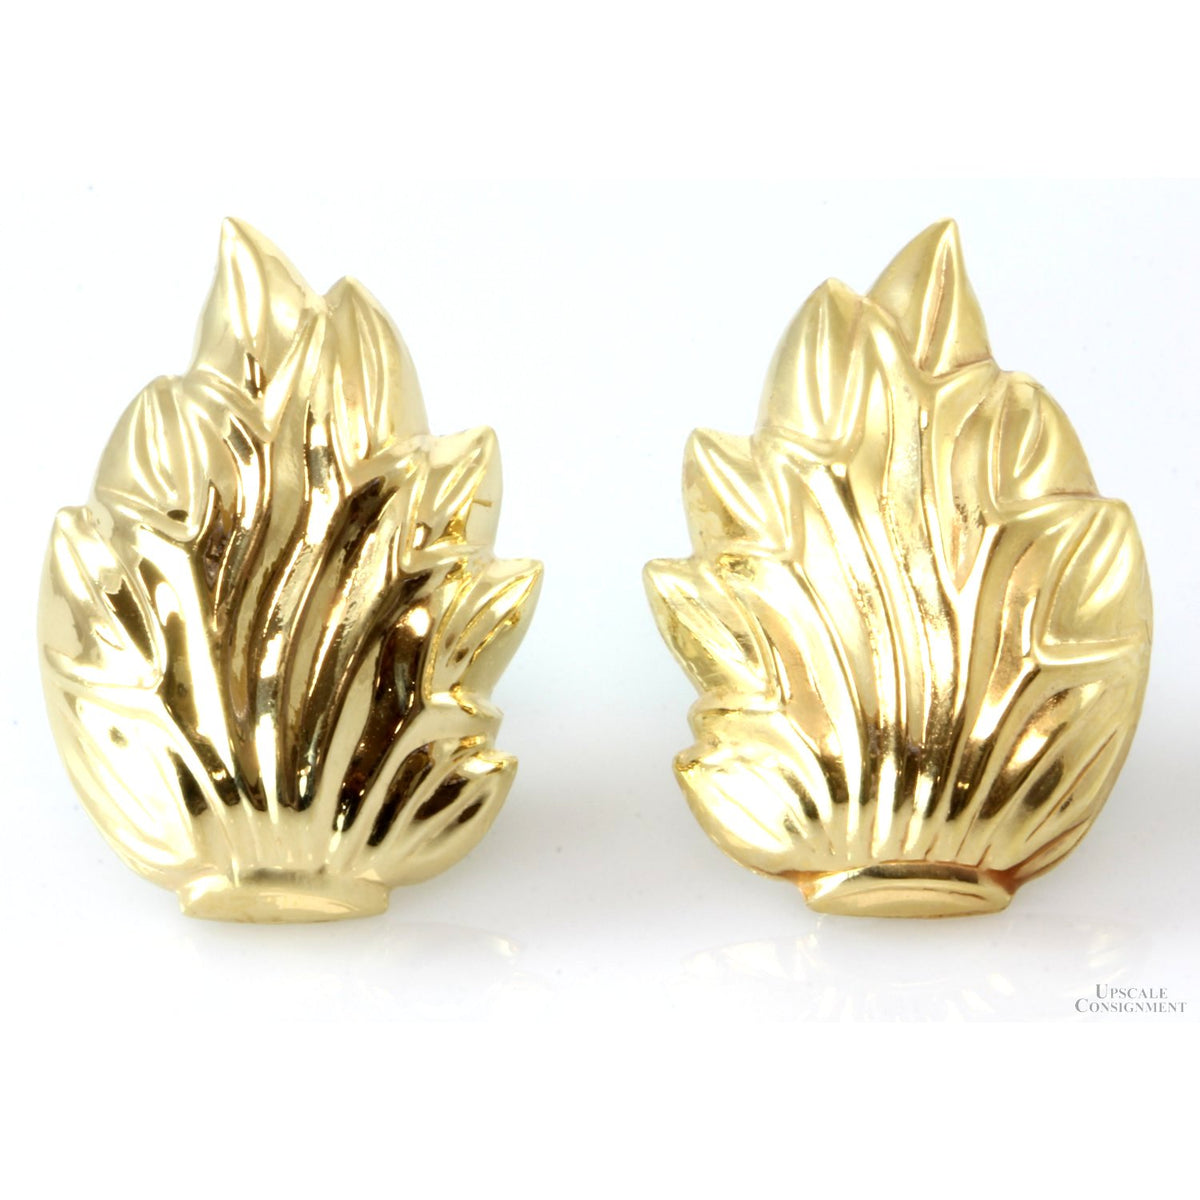 14K Gold Hollow-Form Leaf Flame Earrings